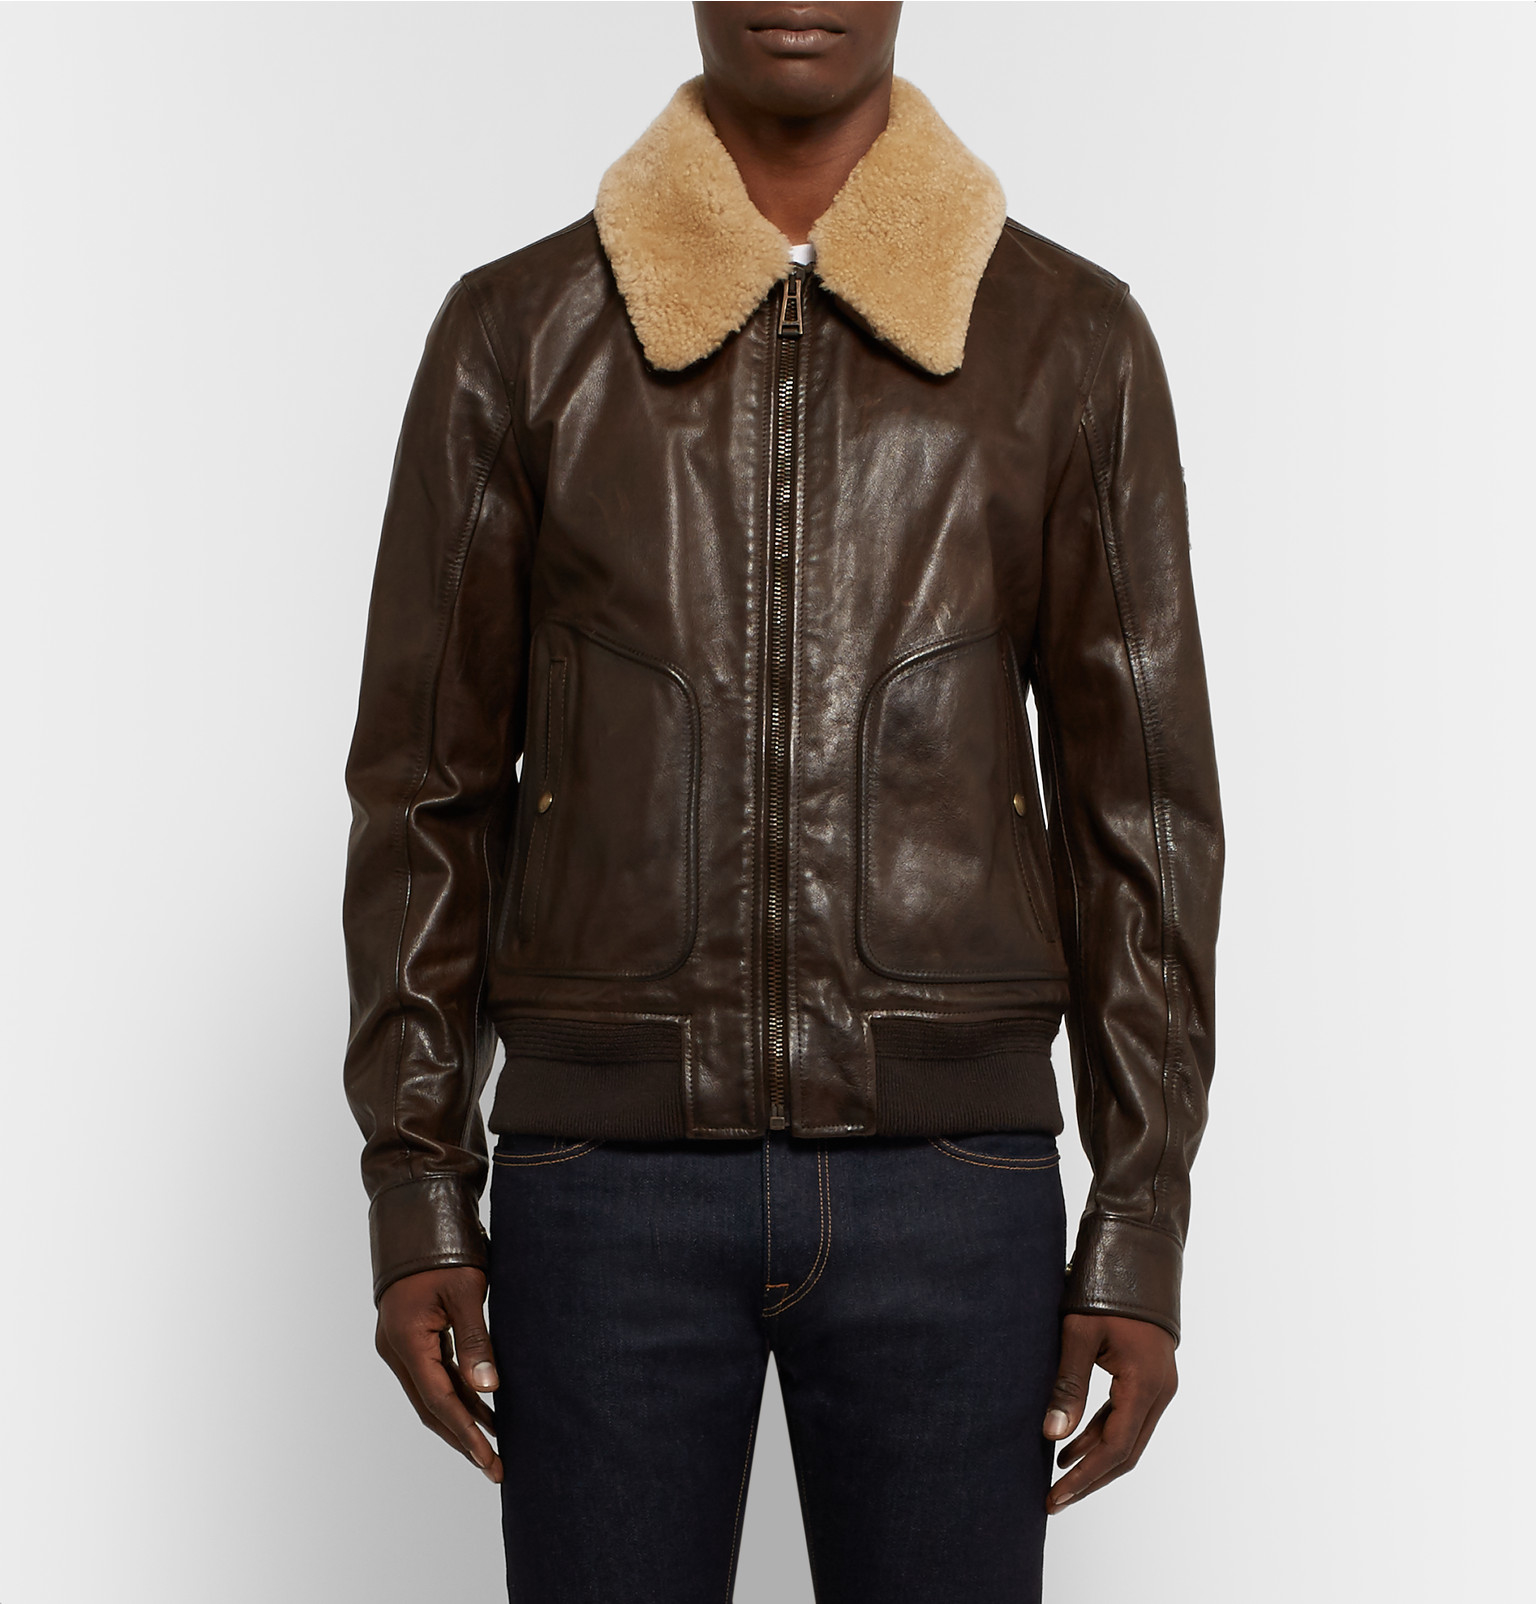 Lyst - Belstaff Campbell Shearling-trimmed Leather Jacket in Brown for Men